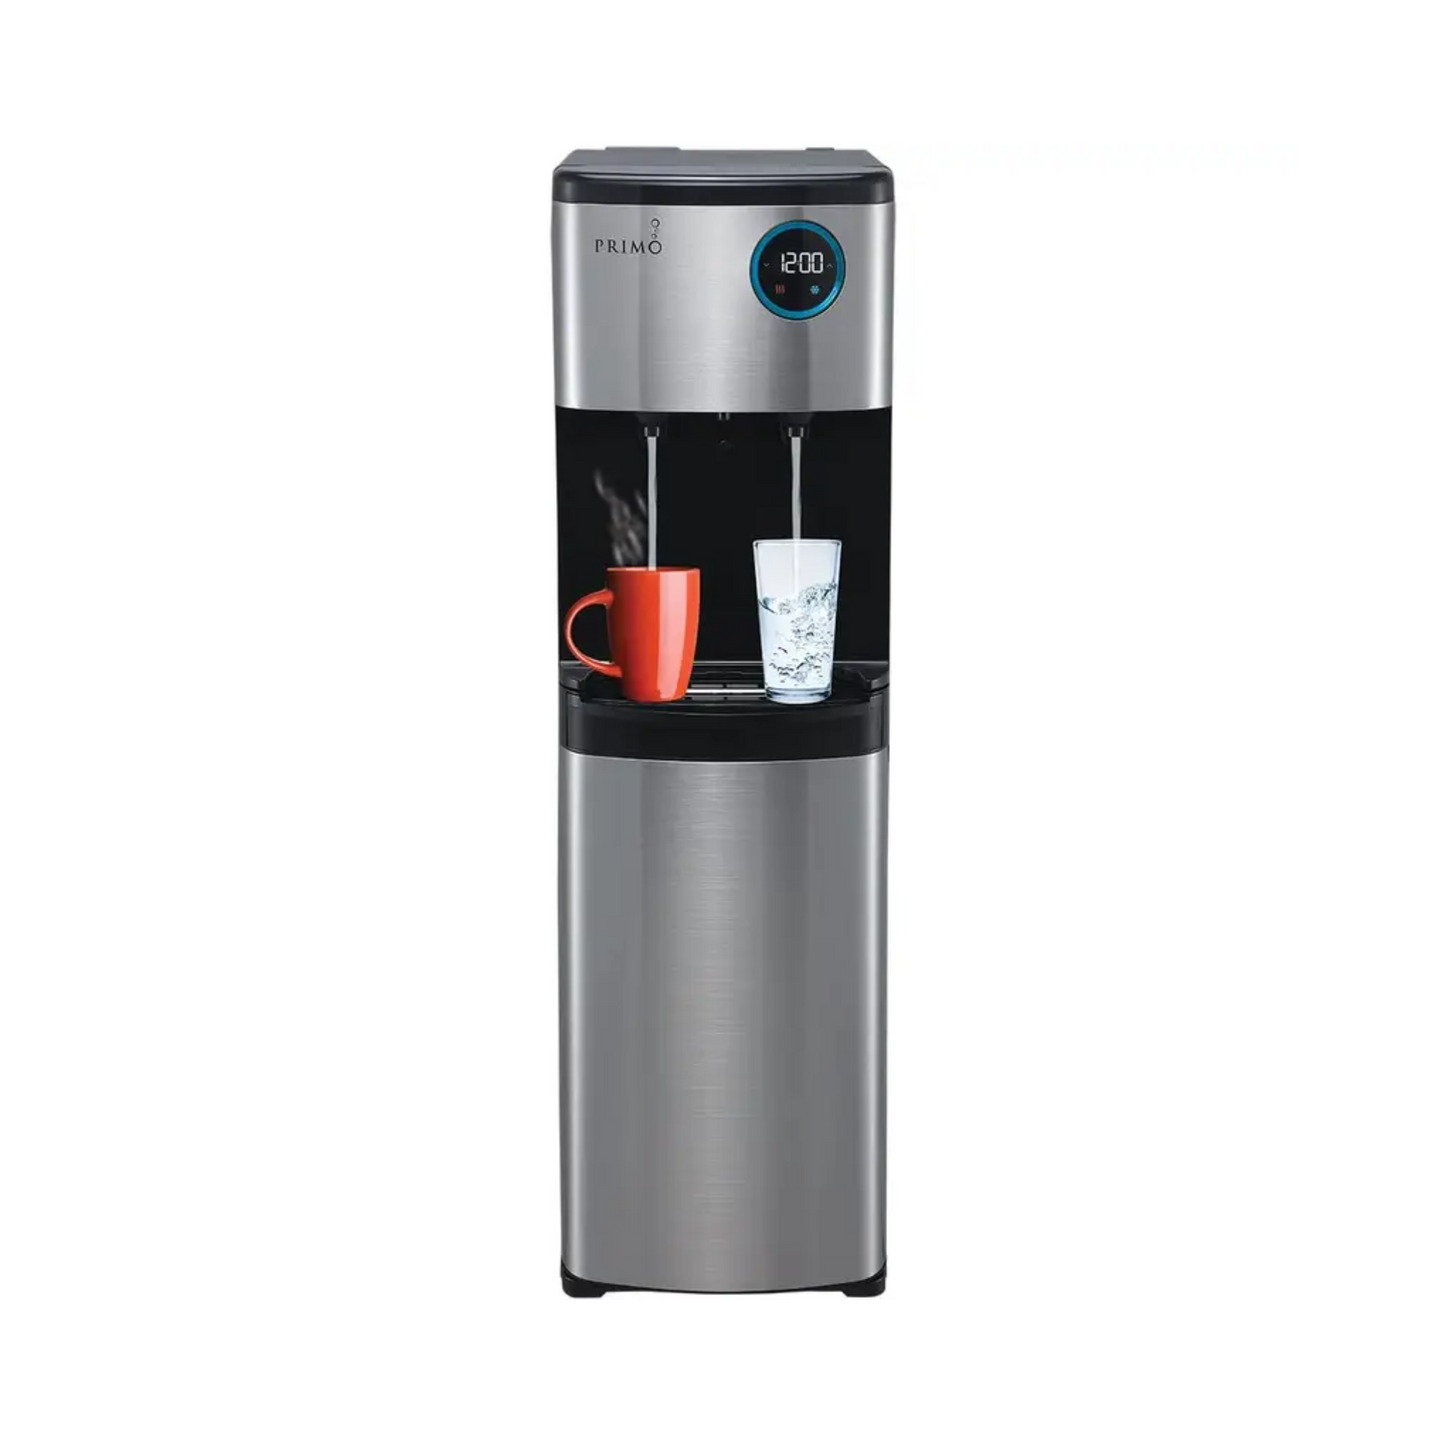 Primo Smart Touch 2.0 Water Dispenser with Stainless Steel Finish